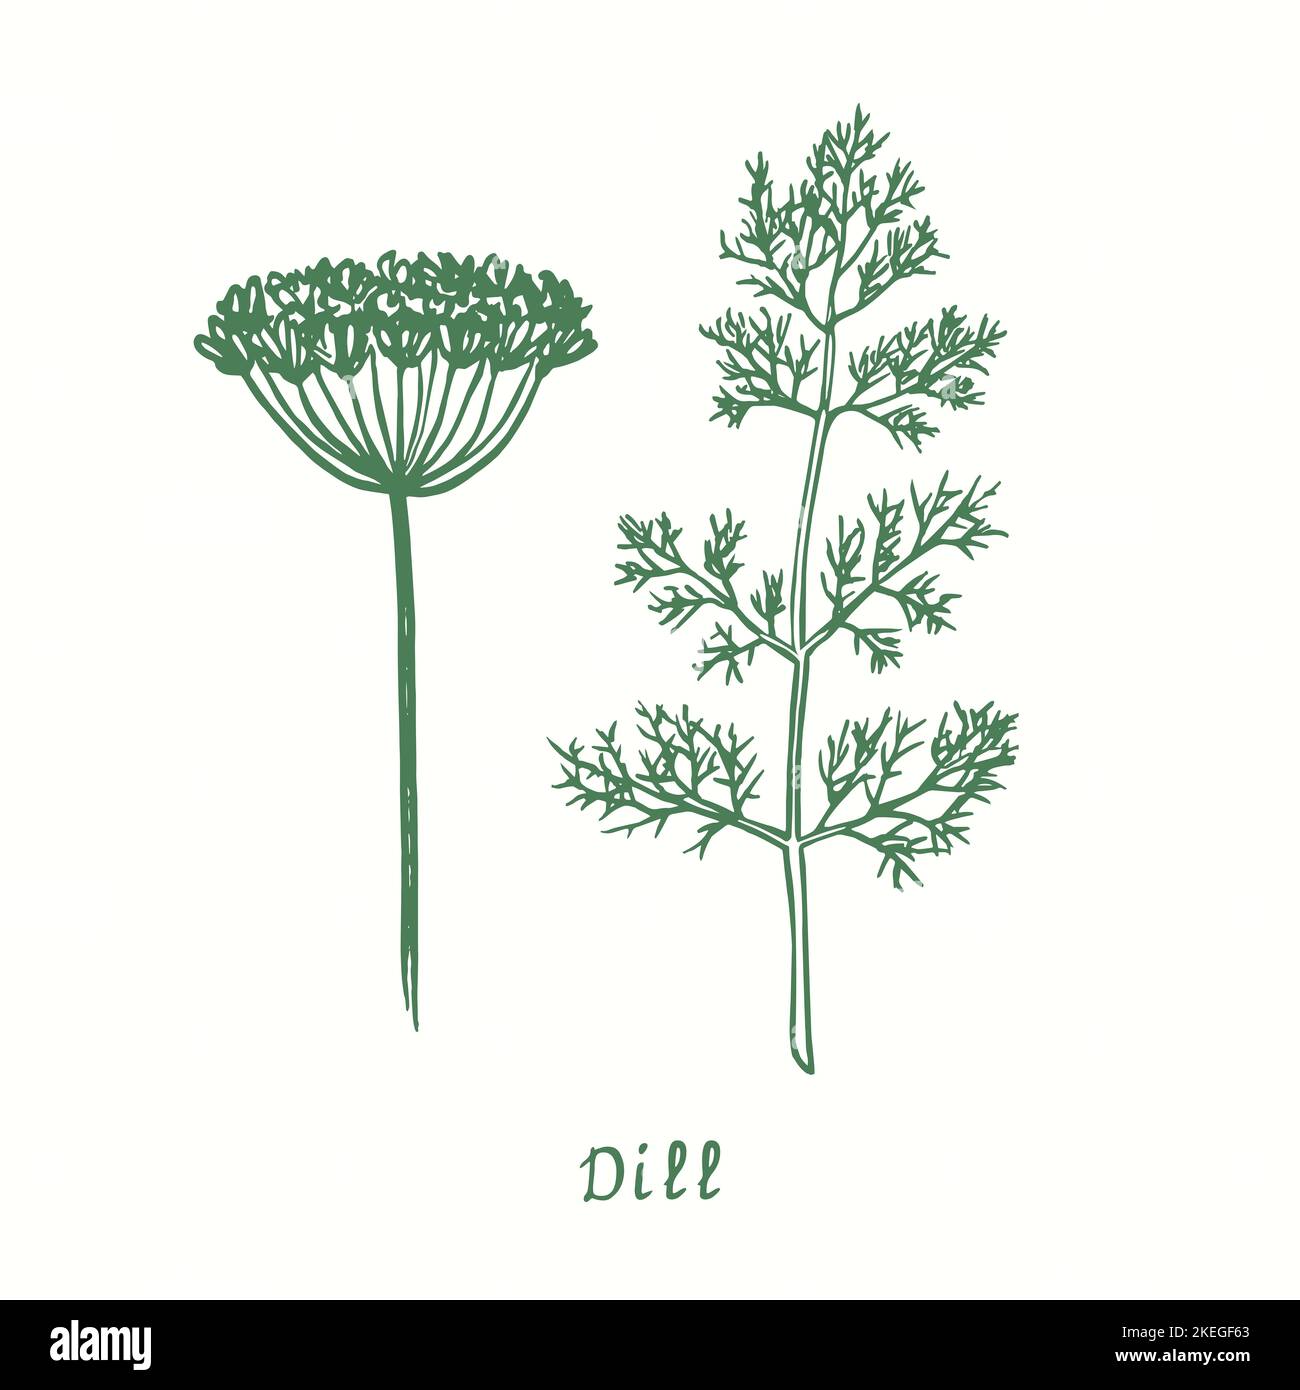 Dill green twig and flower.  Ink black and white doodle drawing in woodcut style Stock Photo